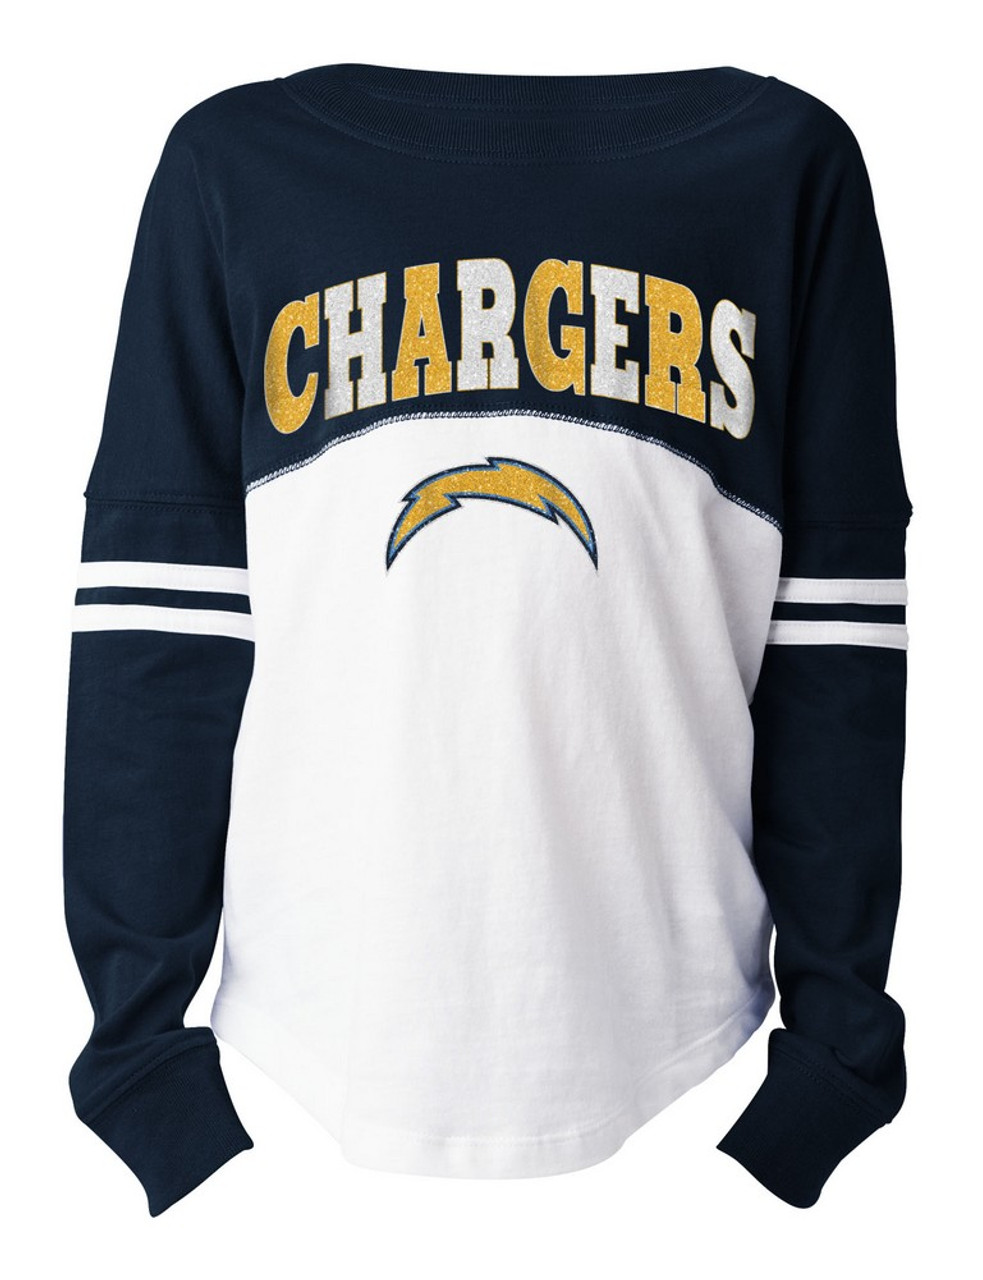 la chargers navy jersey